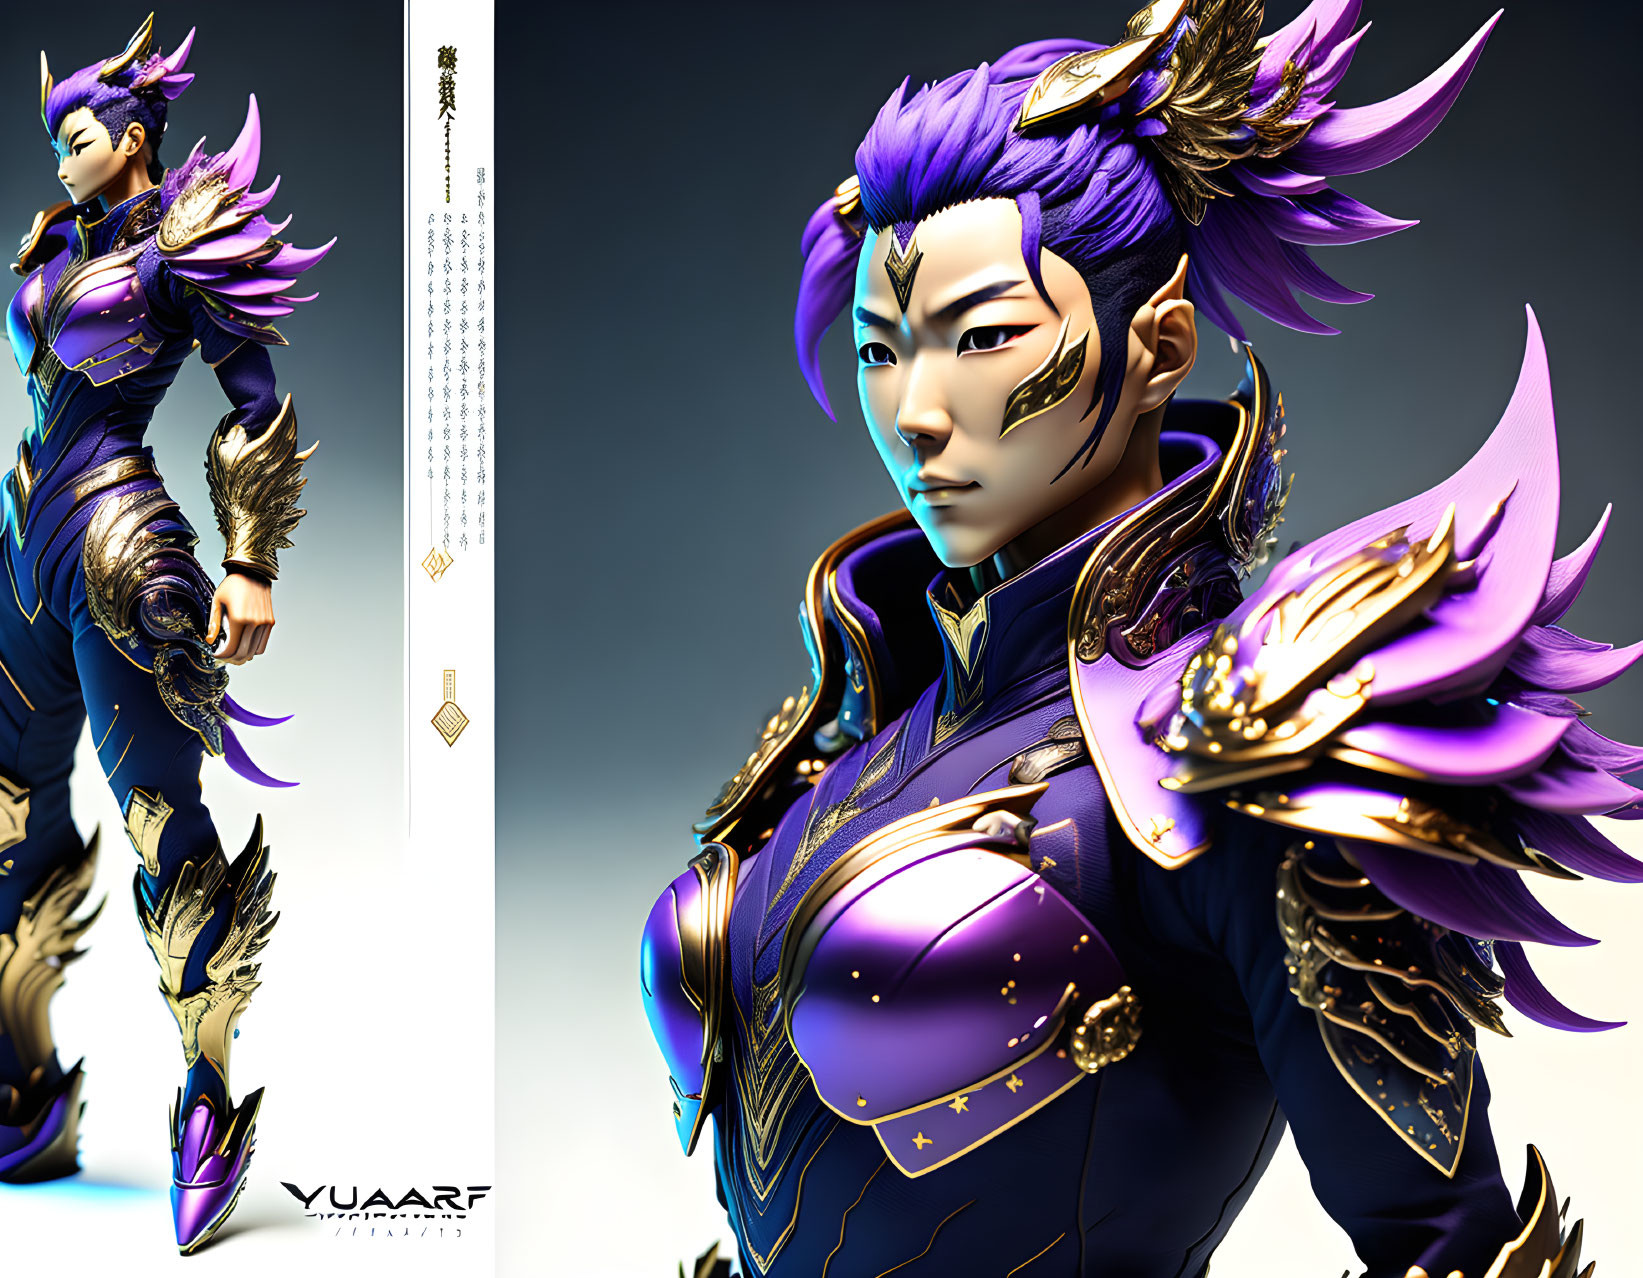 Detailed 3D illustration of character with purple hair and golden armor